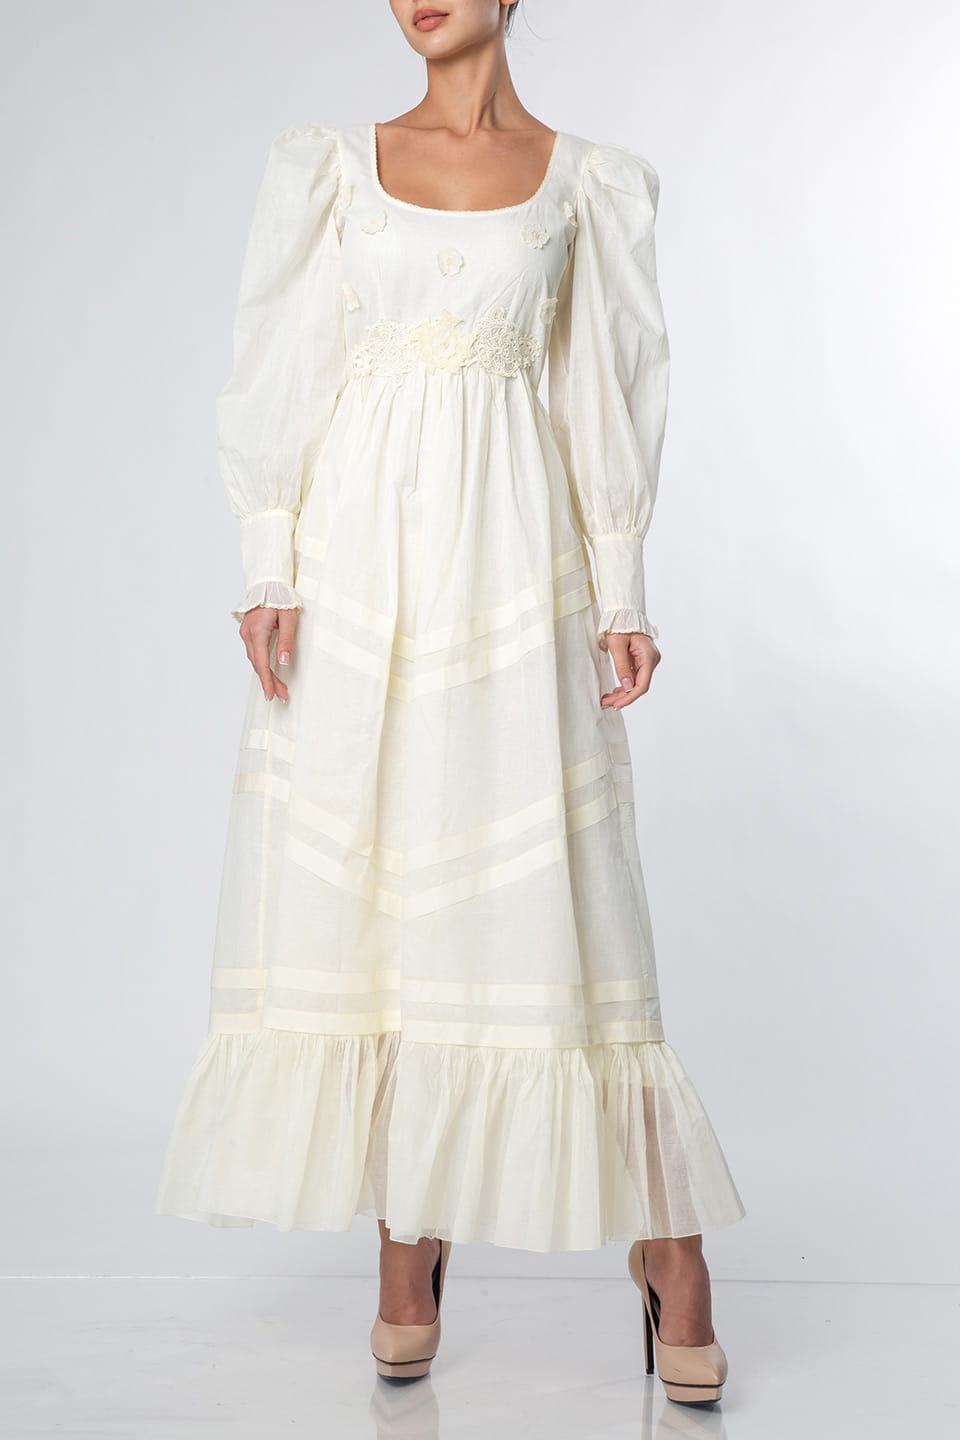 Thumbnail for Product gallery 1, Manoush religeuse long dress chantilly front side